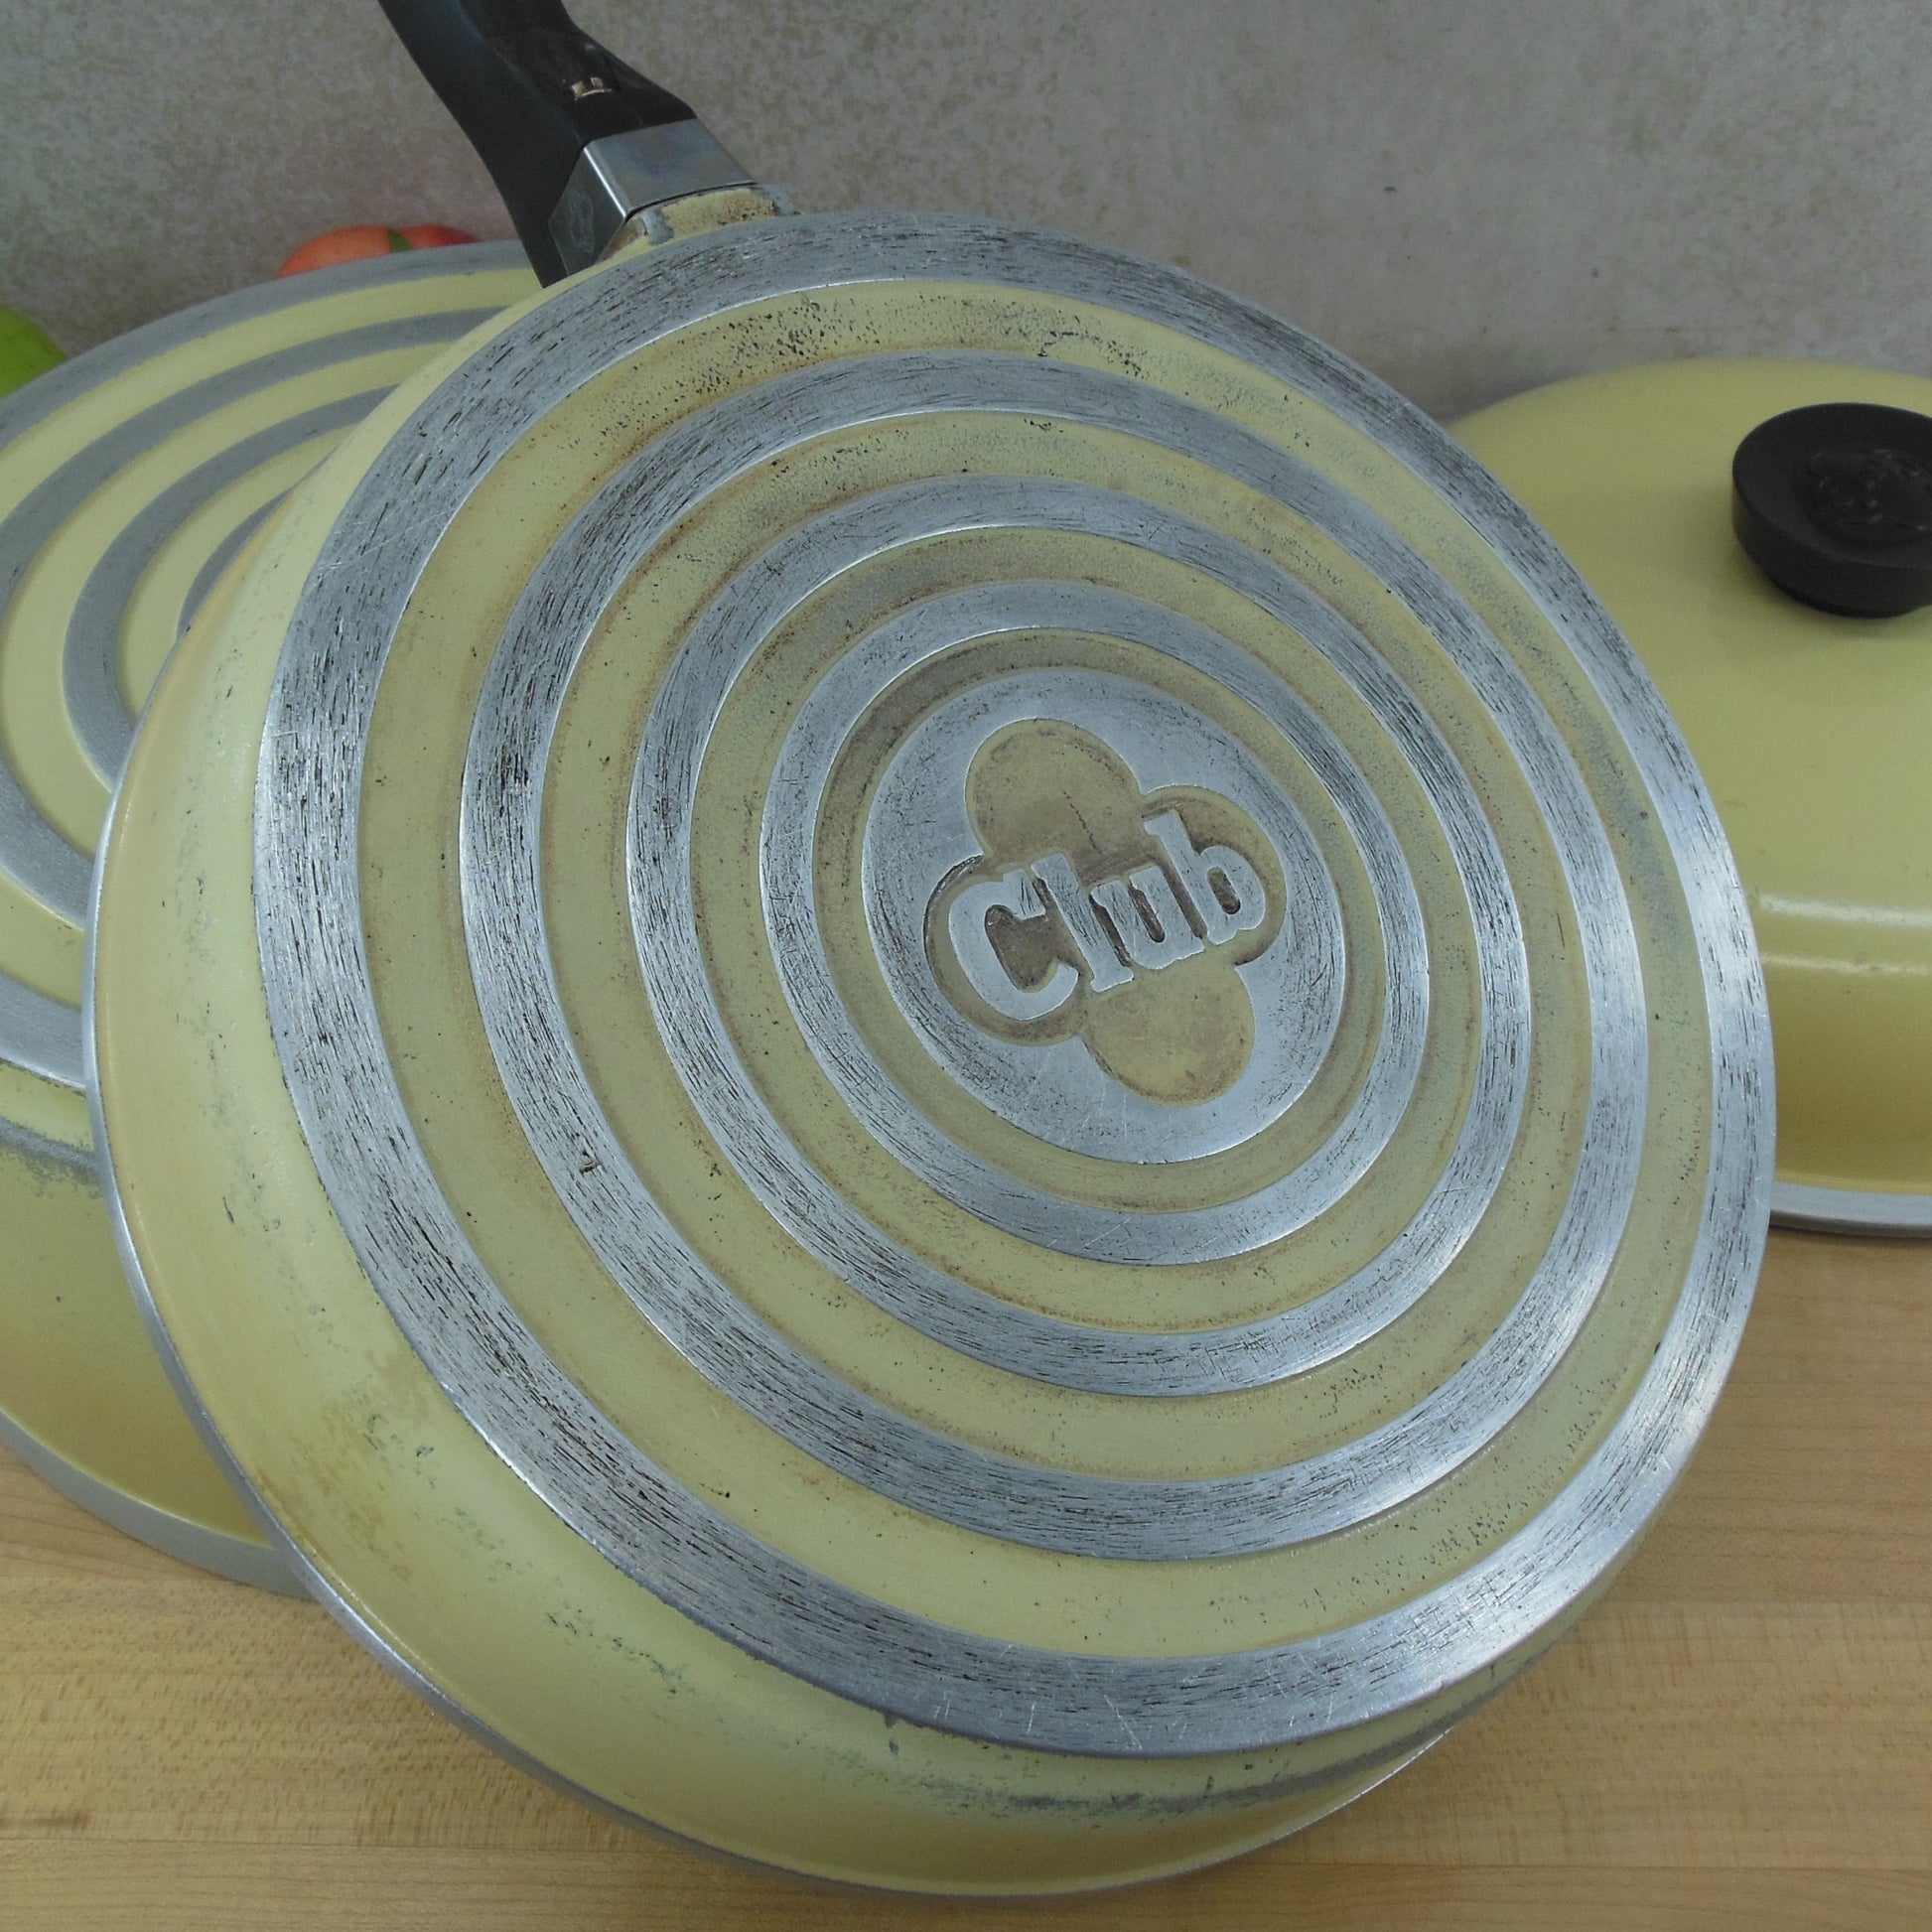 GET CA-009-Y/BK Heiss 3.5 Qt. Yellow Enamel Coated Cast Aluminum Oval Dutch  Oven with Lid